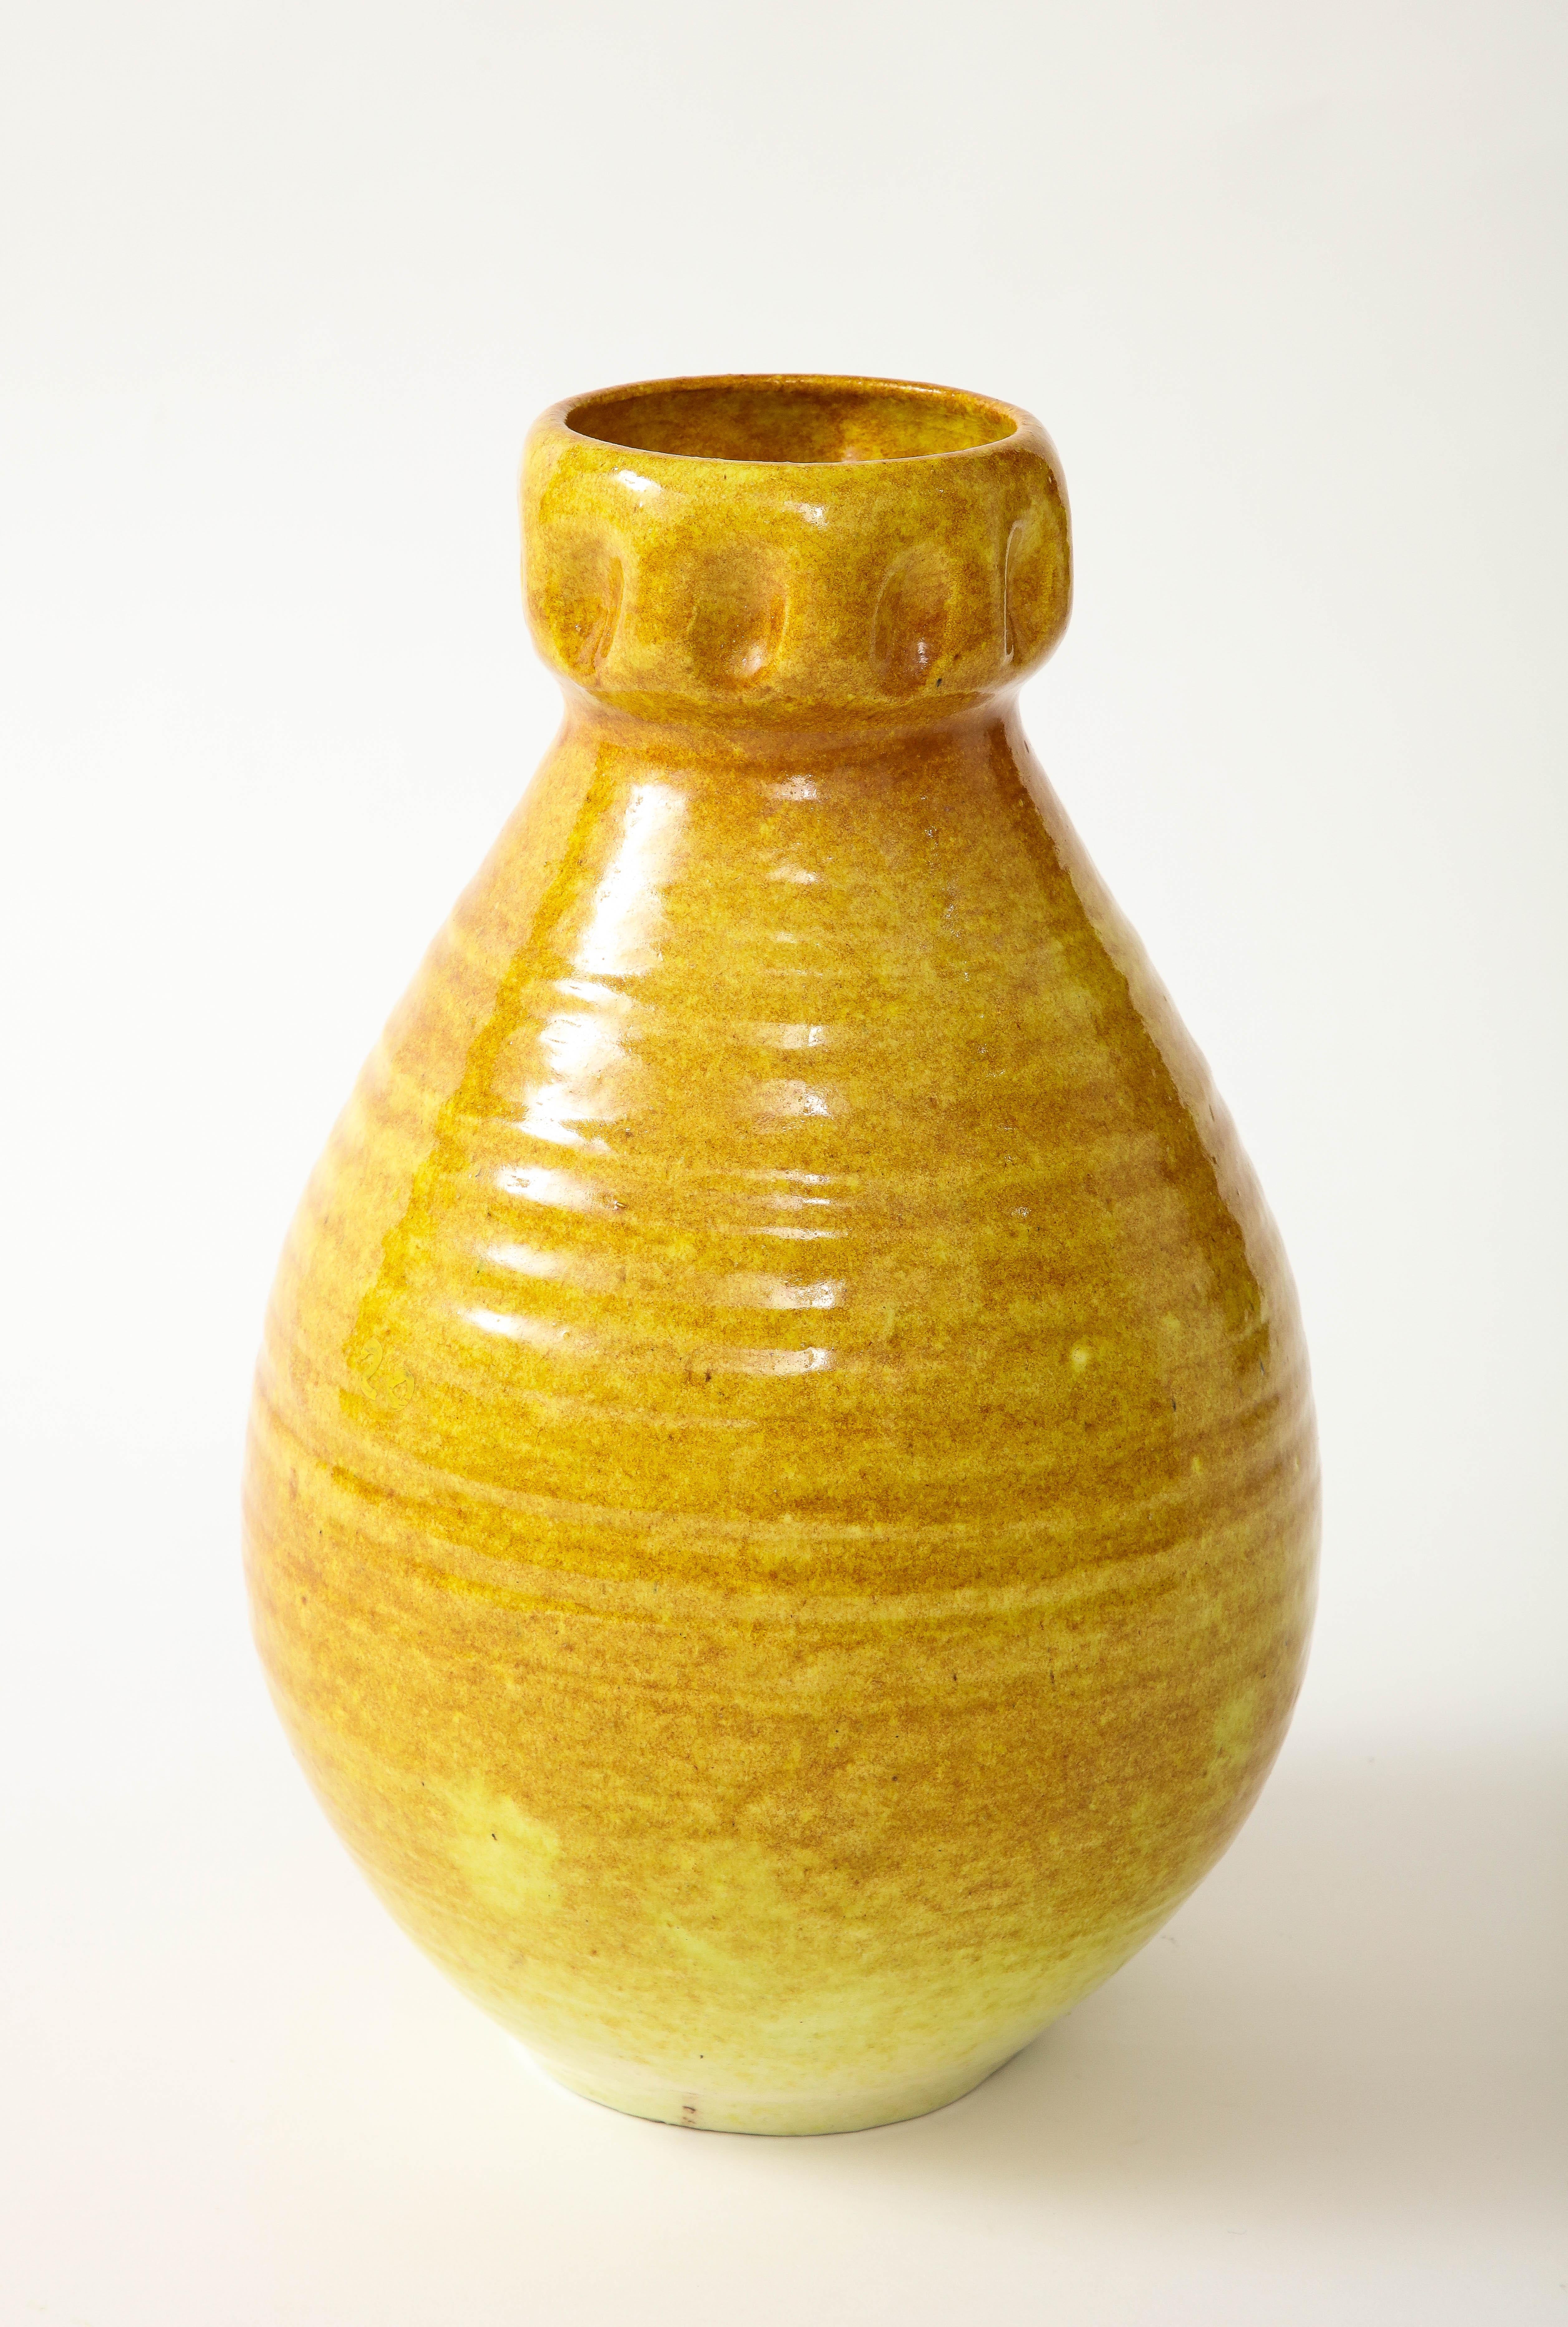 A ceramic vase in a beautiful glaze of a golden yellow produced by Accolay Pottery. Founded in the 1950s in Accolay, France, the Accolay studio became well known after it produced buttons for the collection of Christian Dior. One of several pieces